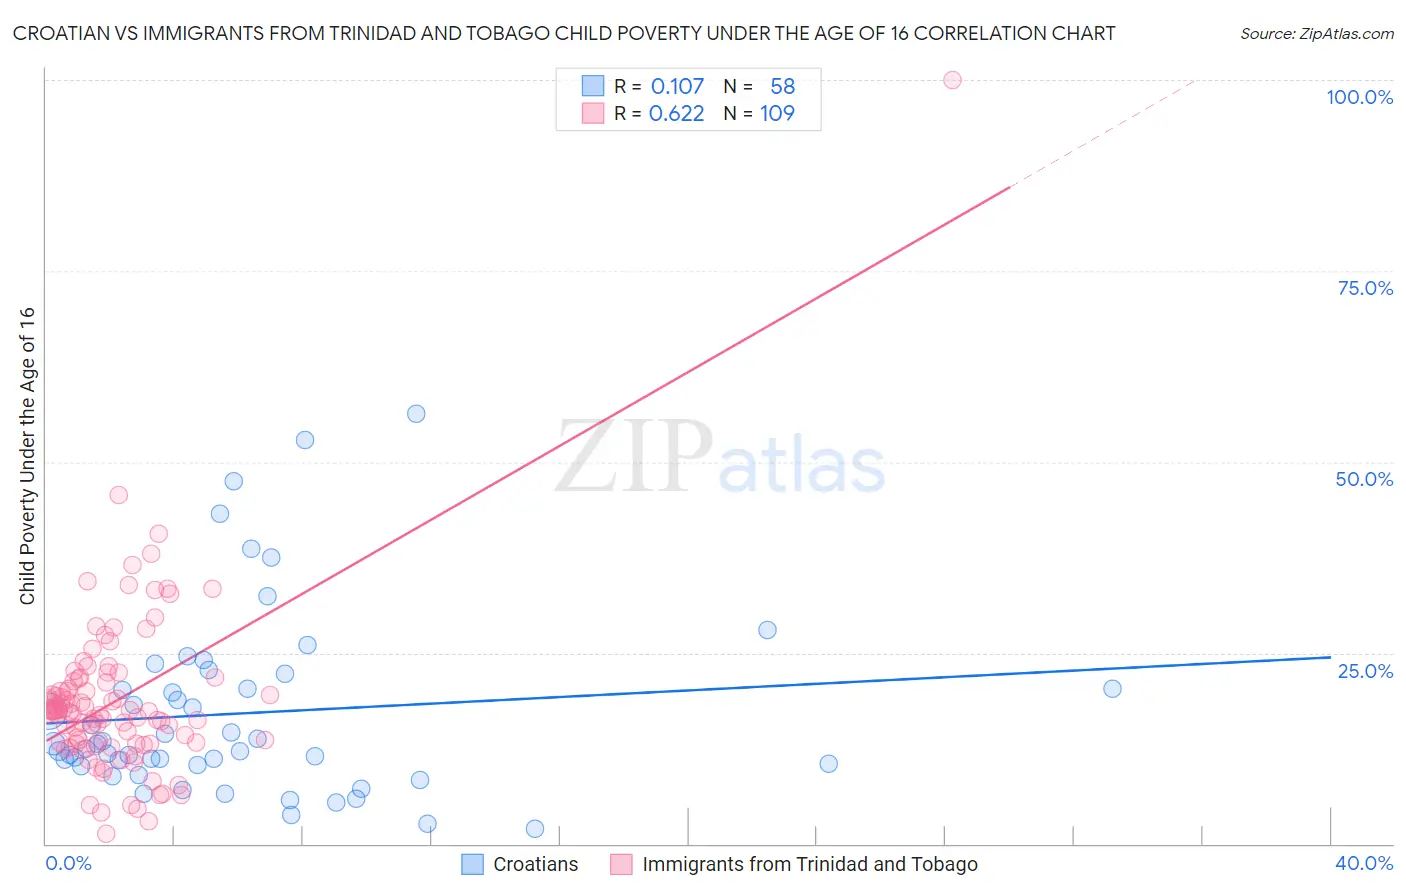 Croatian vs Immigrants from Trinidad and Tobago Child Poverty Under the Age of 16